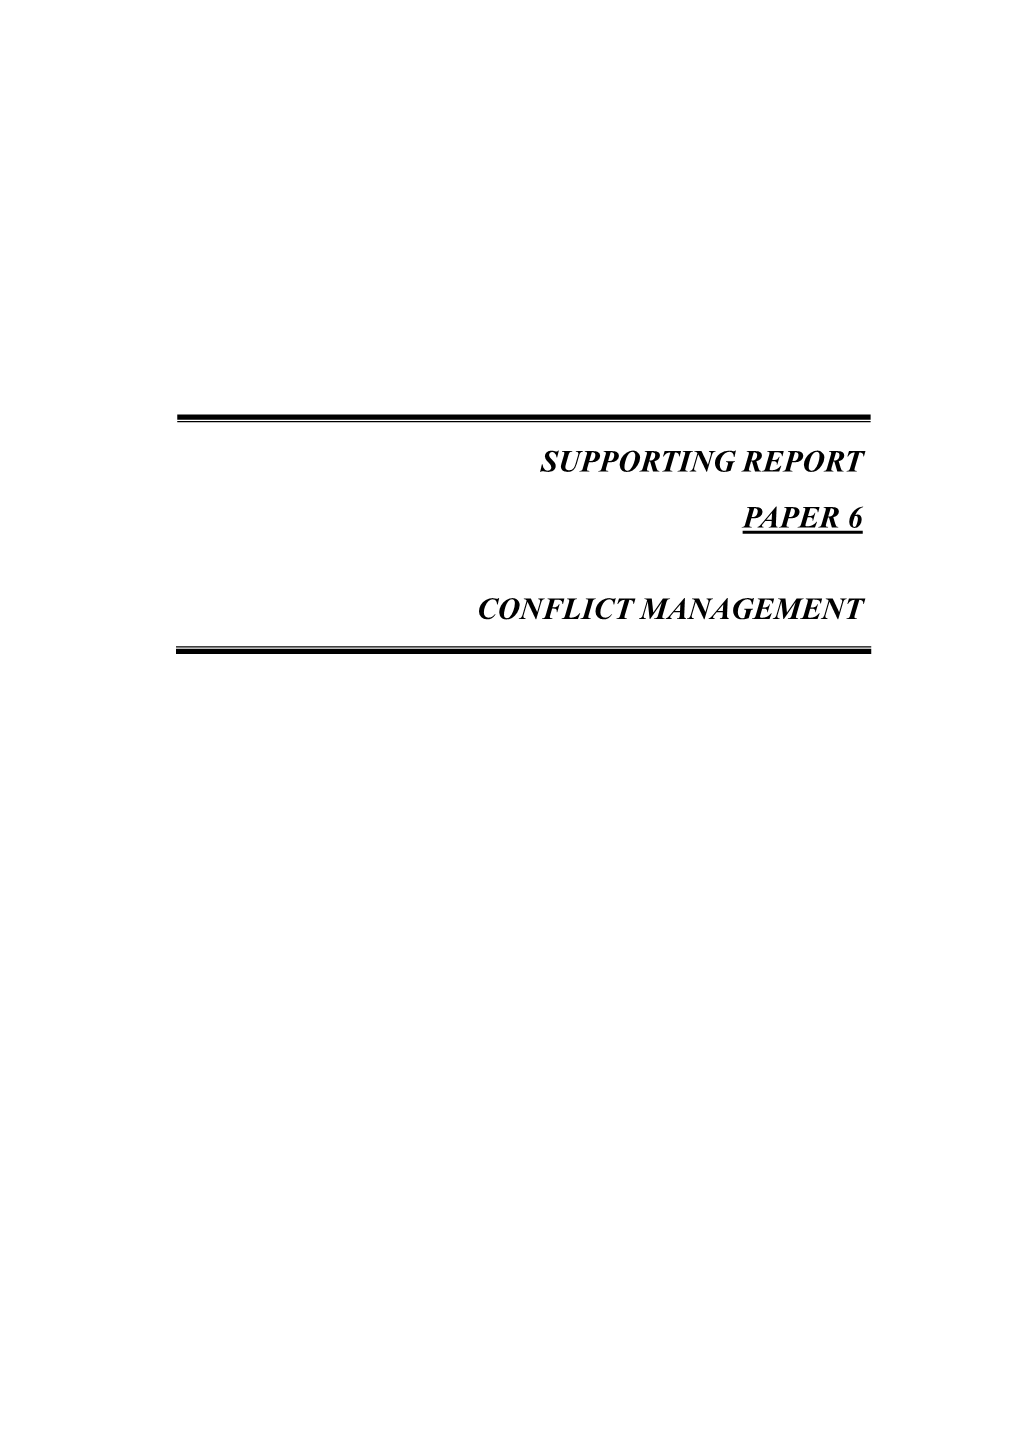 Supporting Report Paper 6 Conflict Management